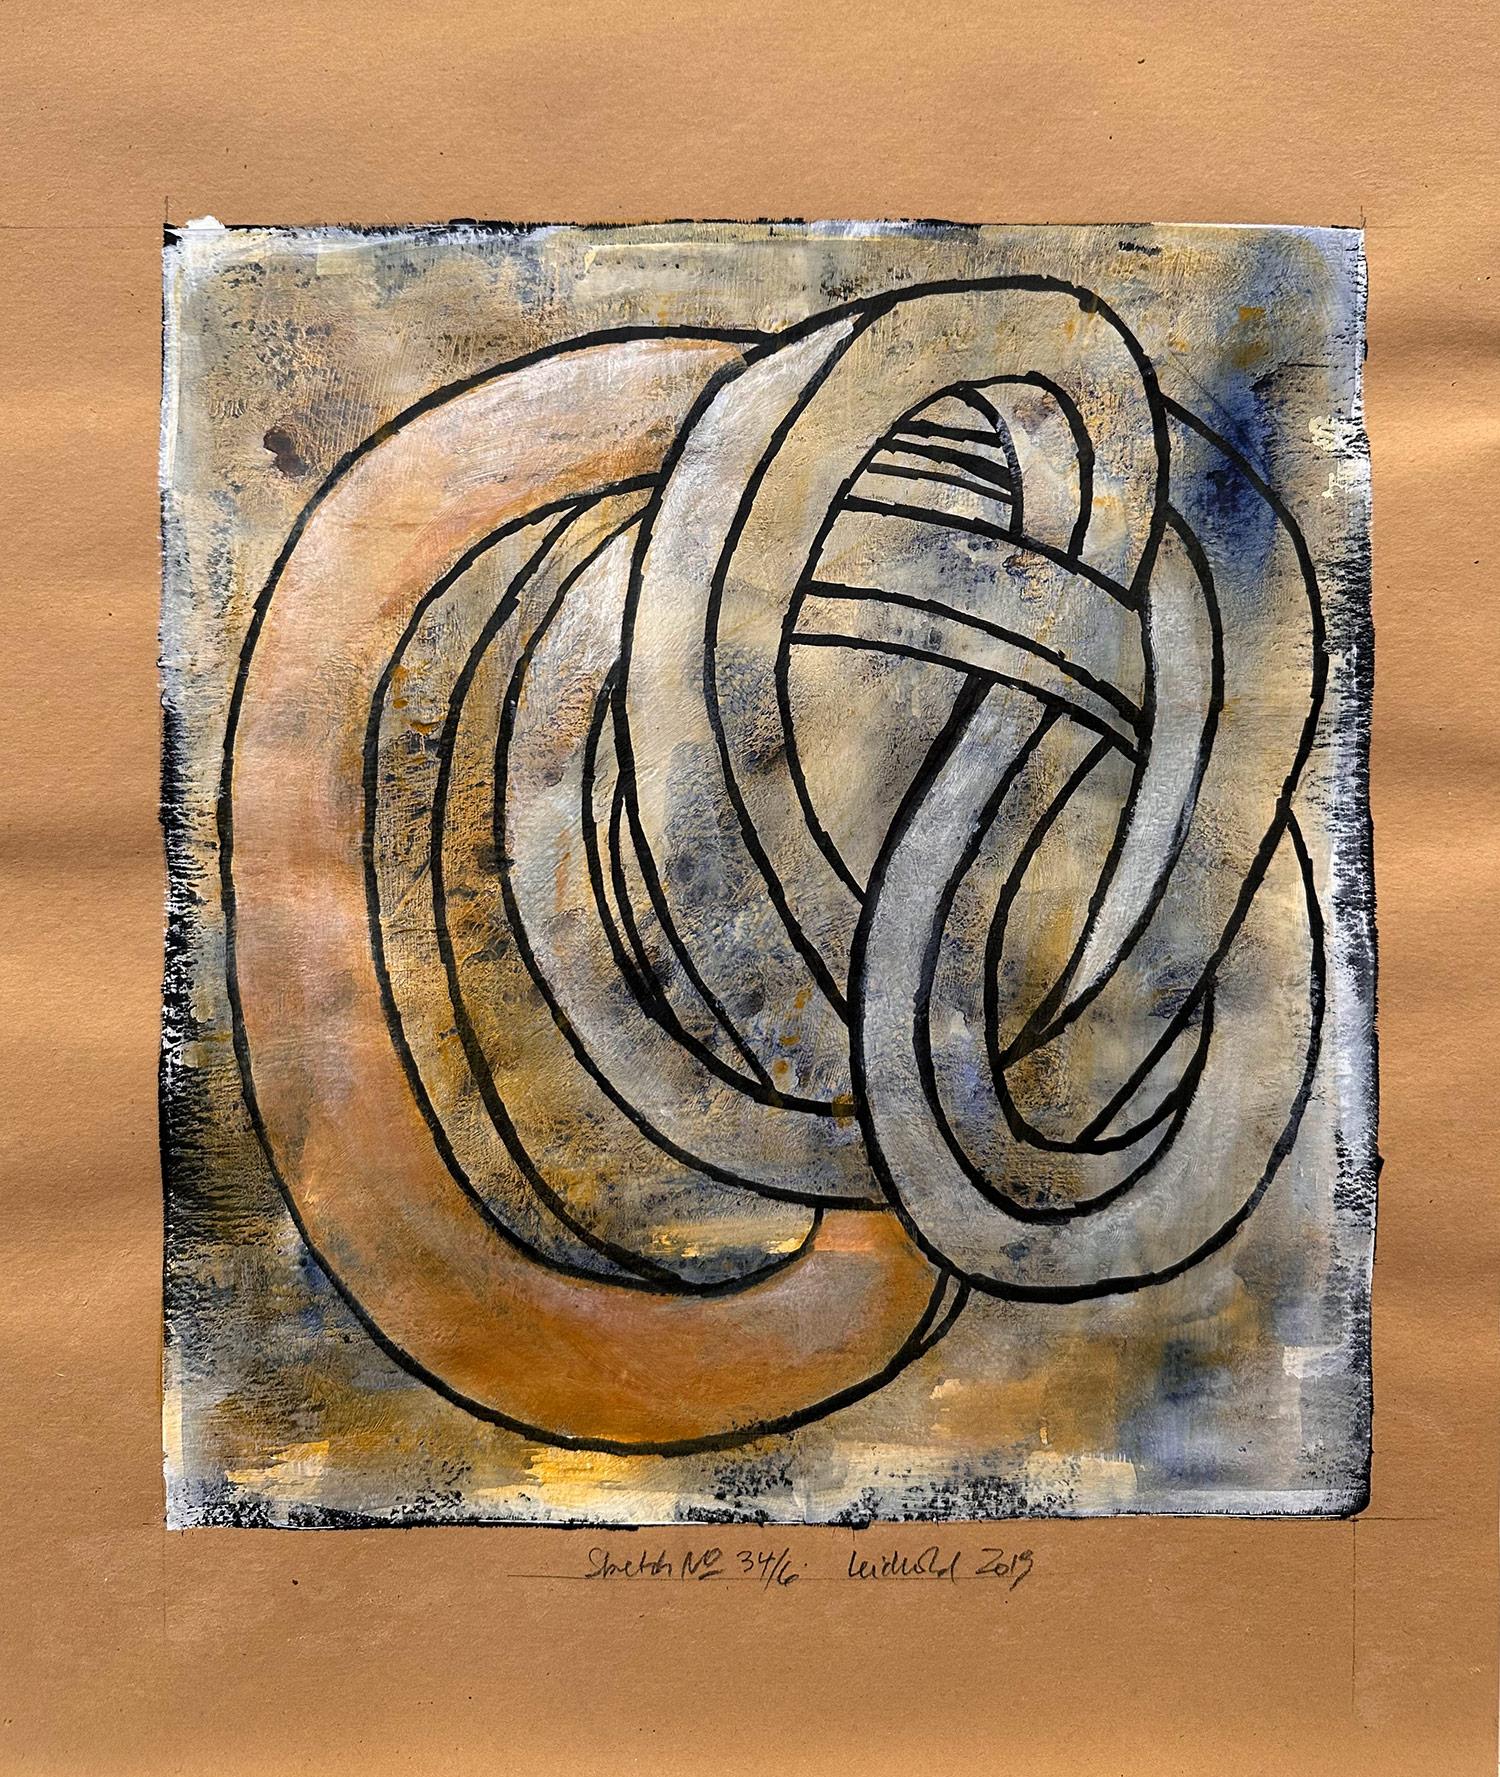 Wolfgang Leidhold Abstract Painting - "Sketch No.34/6" Abstract Representational Kinetic Knot Painting Work on Paper